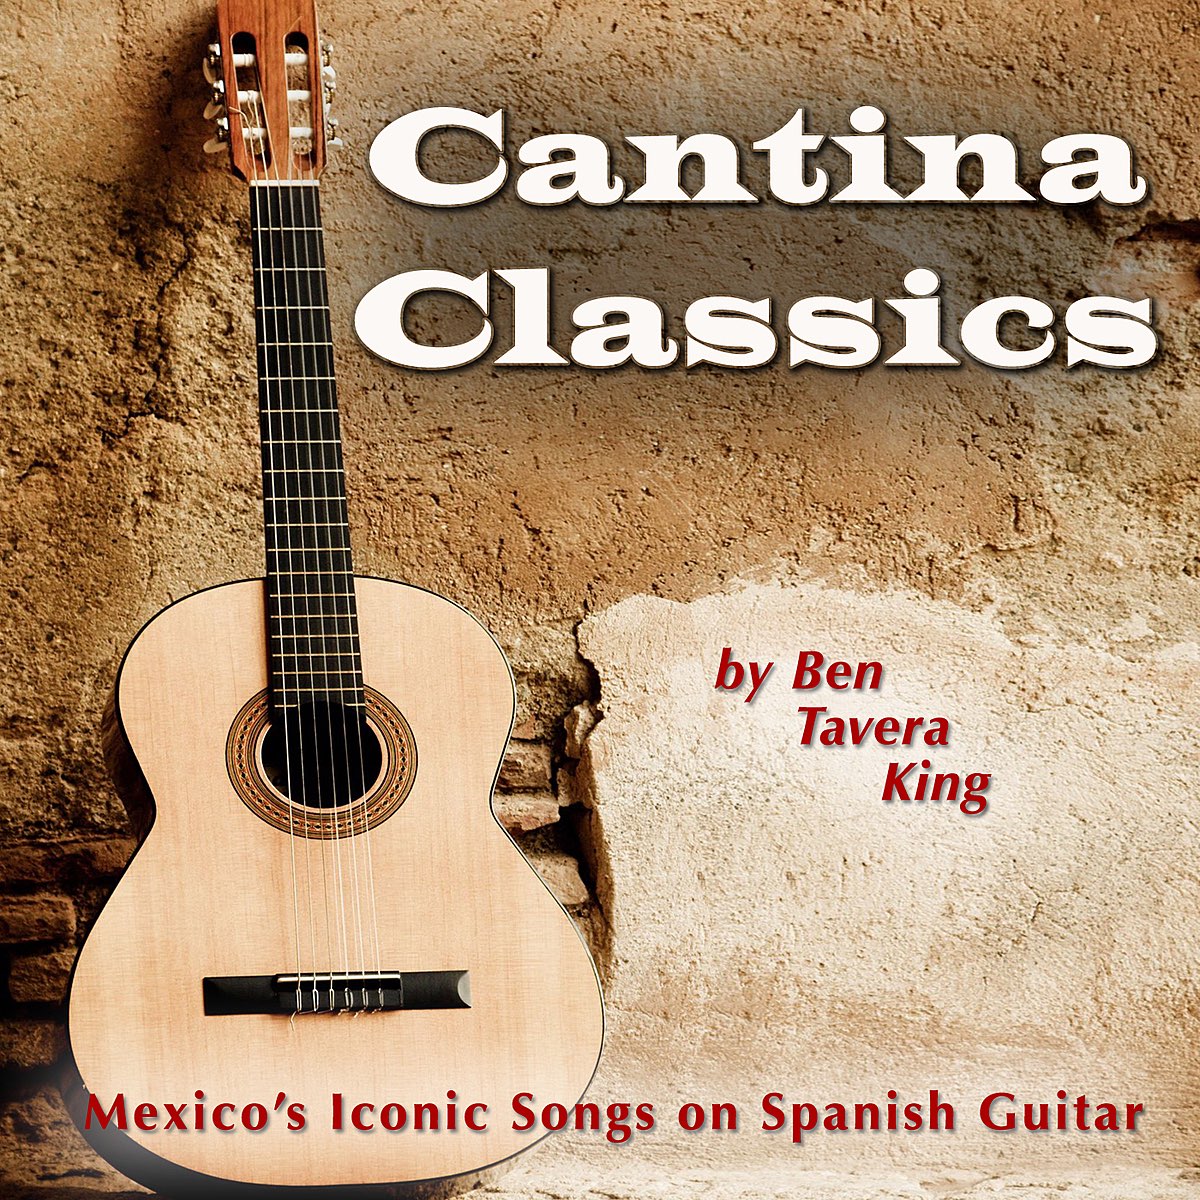 Cantina Classics (Mexico's Iconic Songs on Spanish Guitar) - EP by Ben  Tavera King on Apple Music